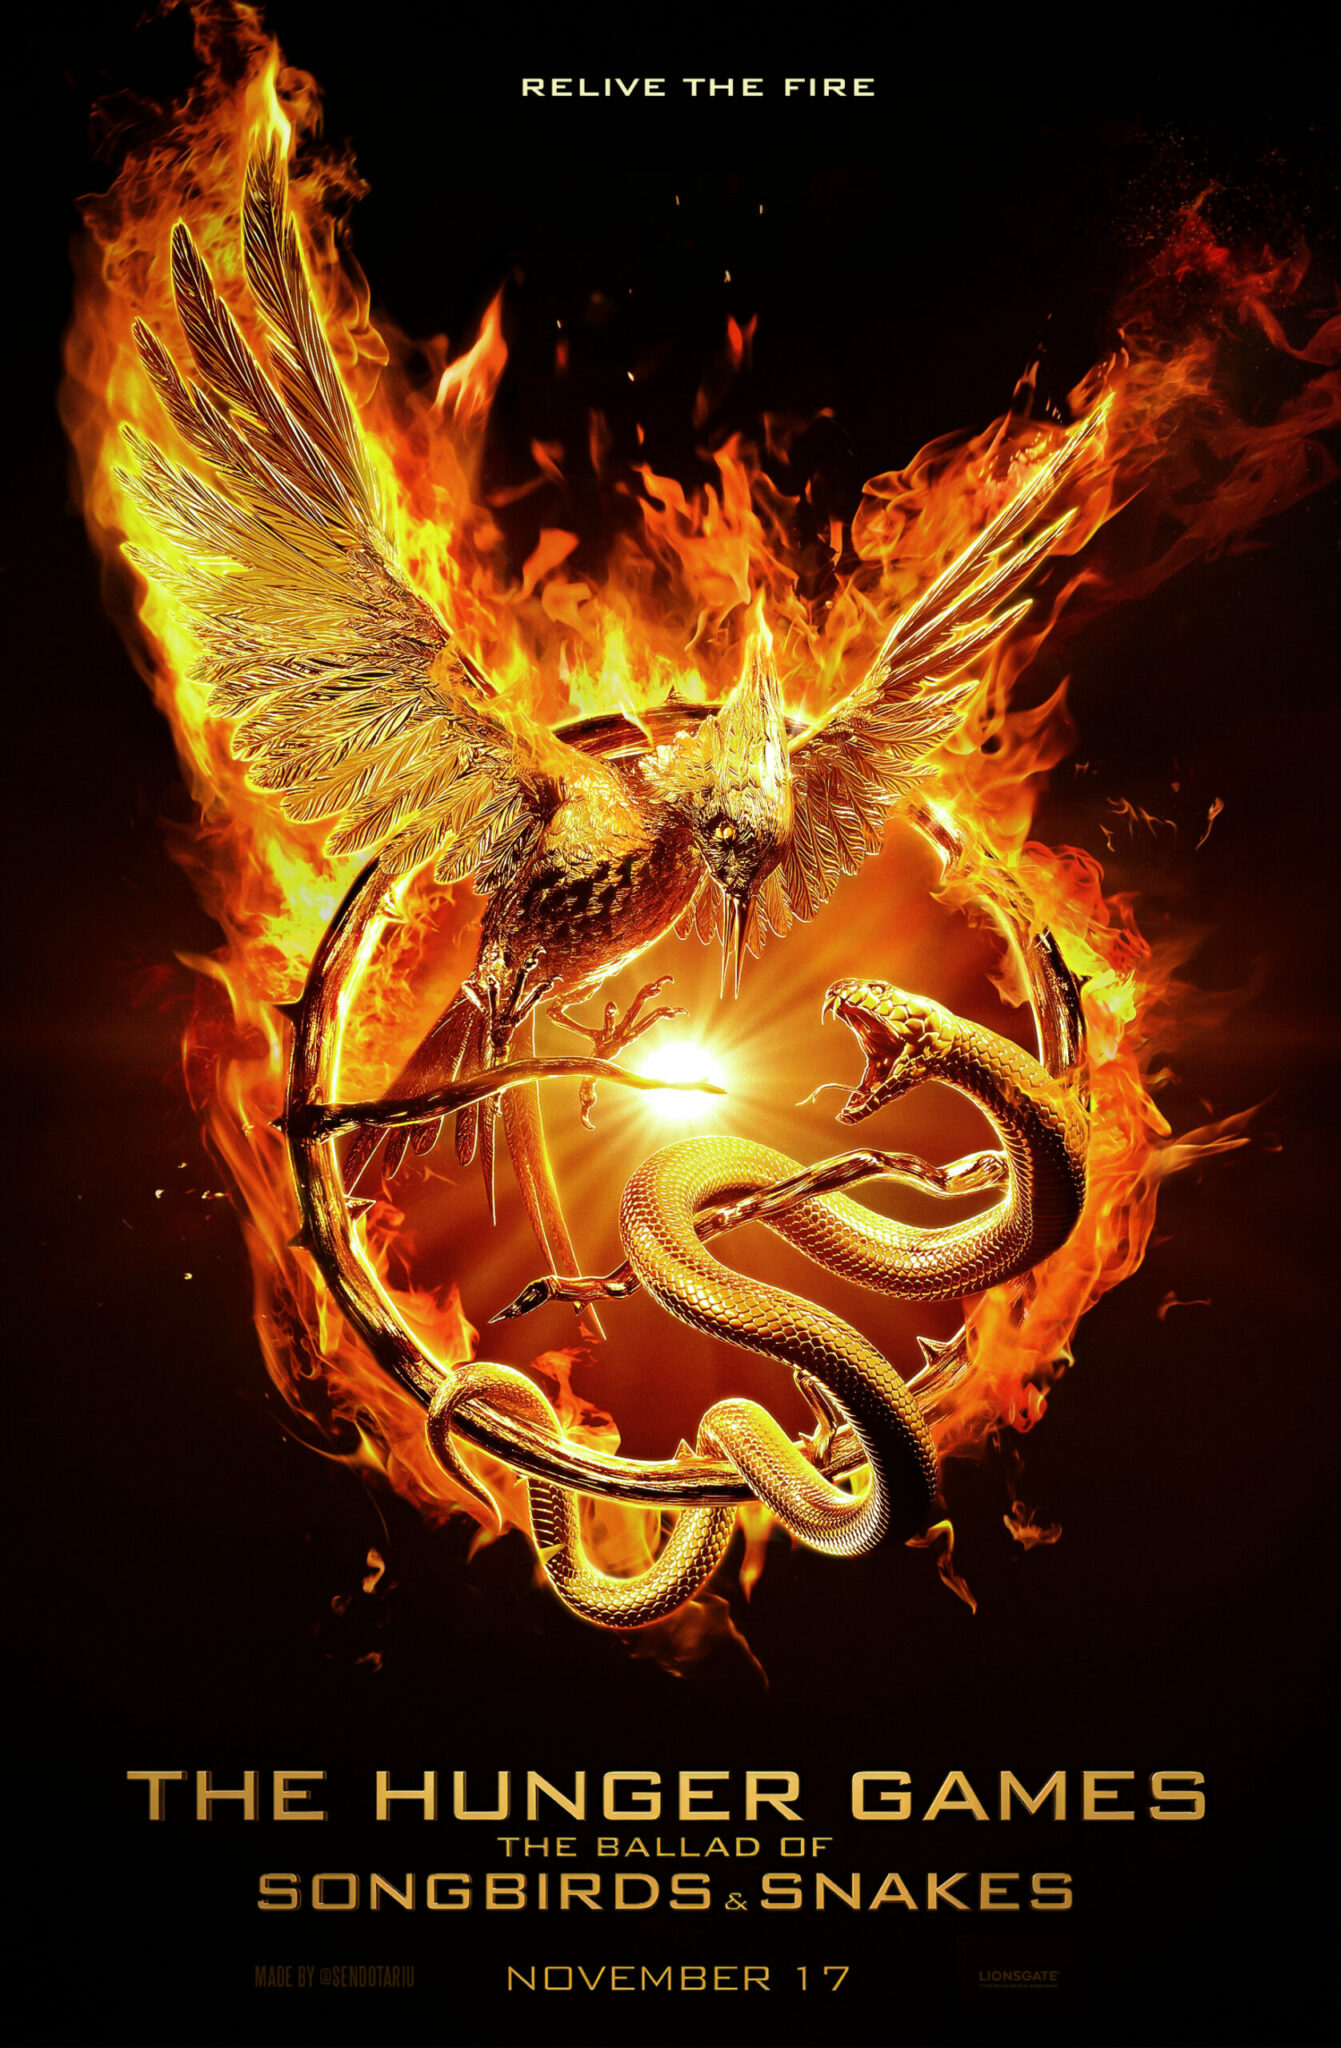 The Hunger Games: The Ballad of Songbirds & Snakes (2023) – “Fire” Concept